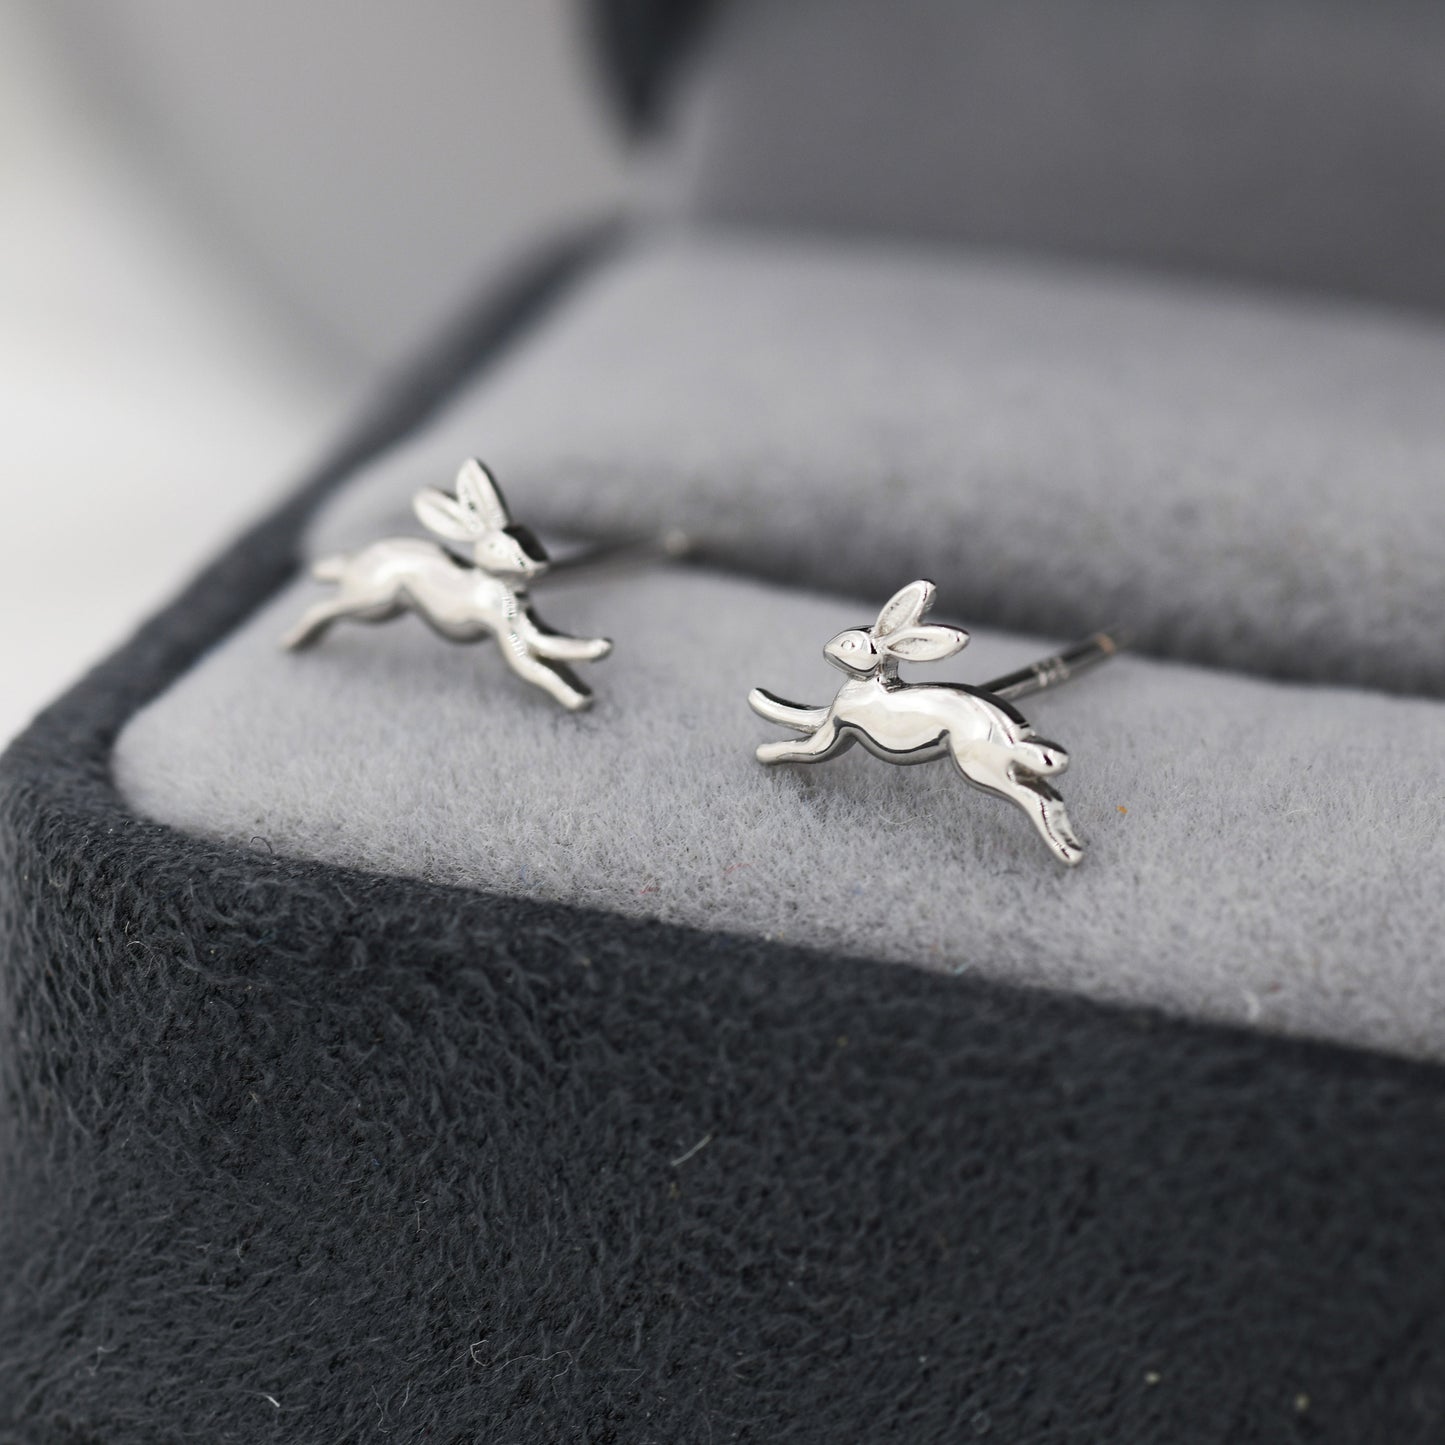 Extra Tiny Leaping Hare Stud Earrings in Sterling Silver, Tiny Hare rabbit Earrings, Nature Inspired Animal Earrings